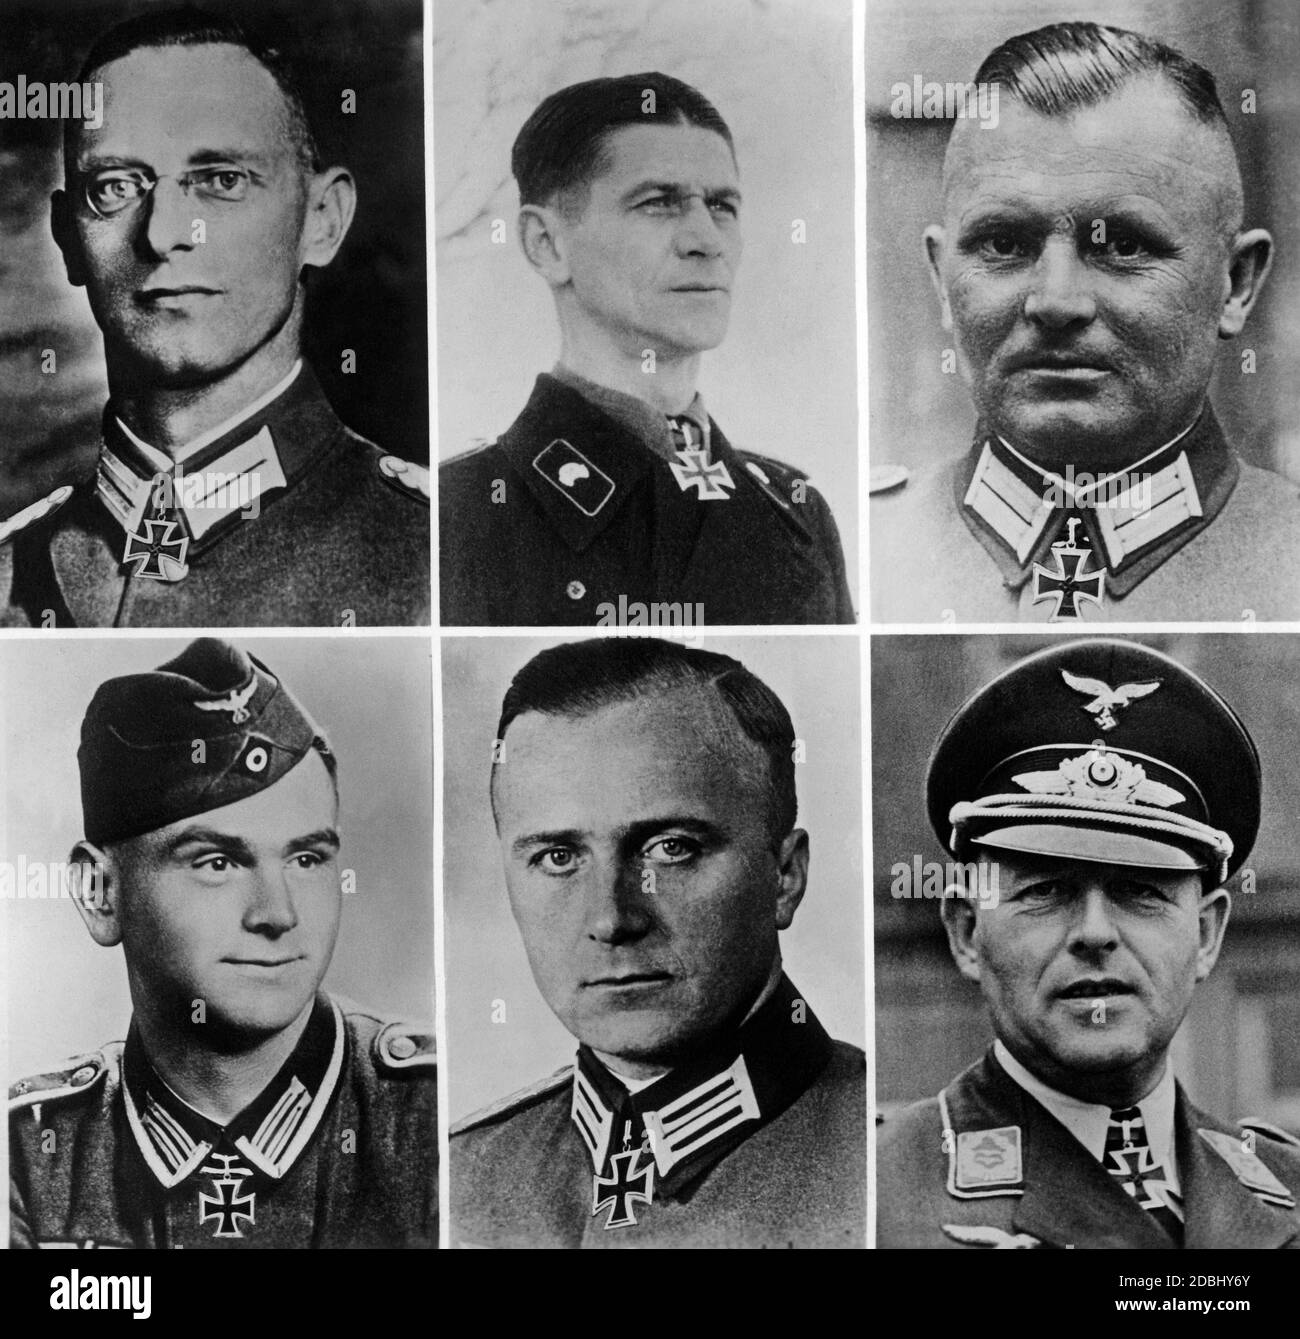 Lieutenant Colonel Karl Britzelmayr, Major Franz Gnaden, Colonel Johann Block, Sergeant Dietrich Koch, Major Guenther Nentwig and Major Max Hecht with the Knight's Cross. The date indicates the date of awarding. Stock Photo